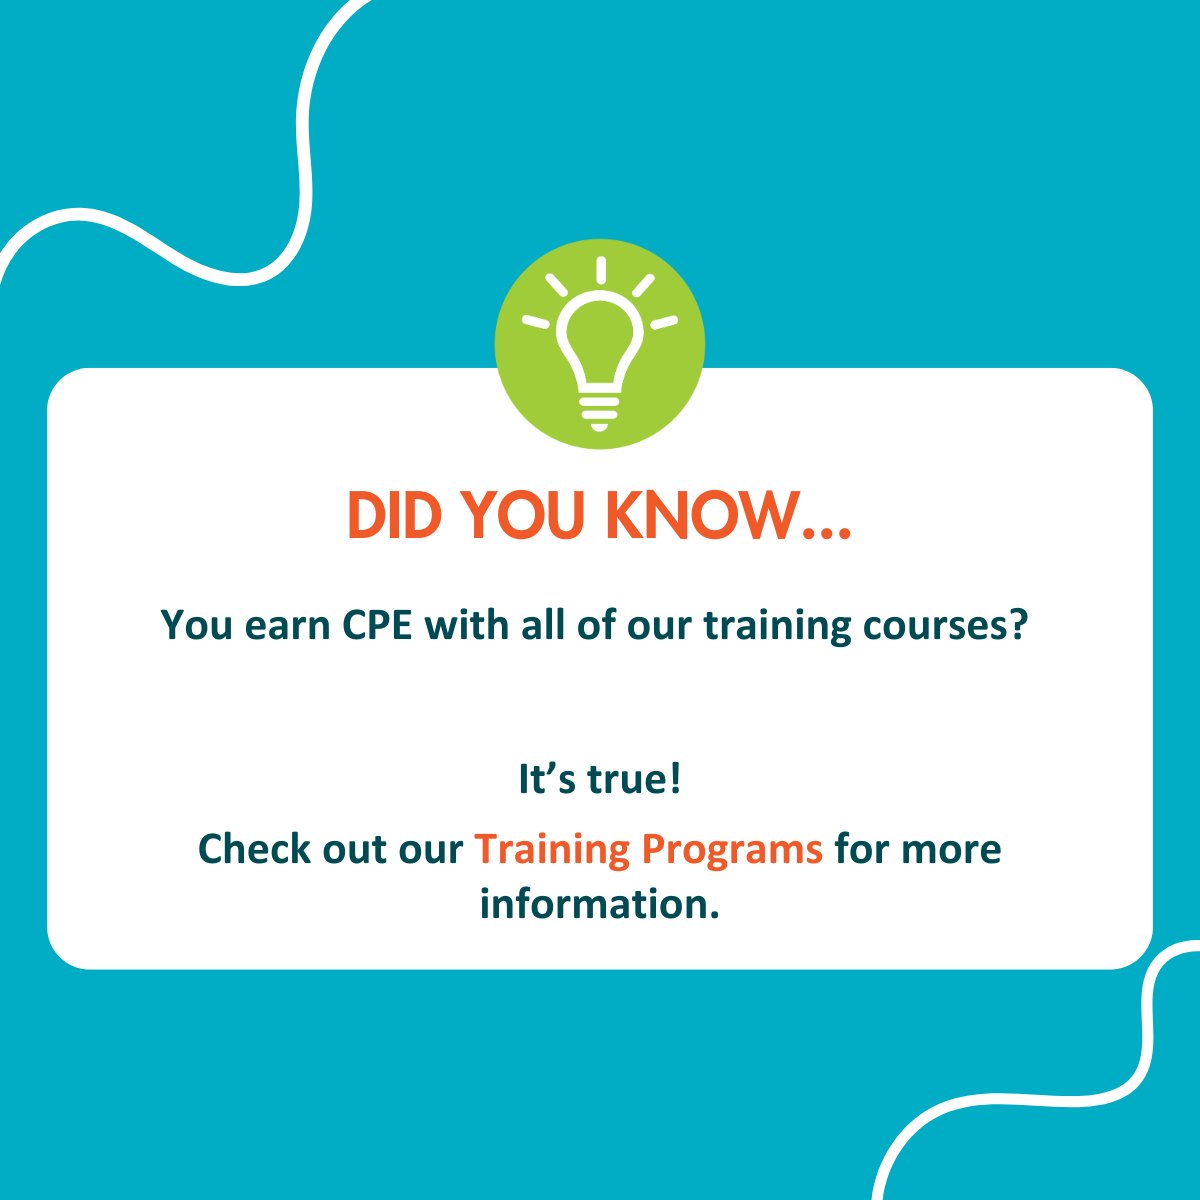 Do you need CPE credits? All our training courses offer CPE credit, a self-study option, and you can complete them at your own pace! Check out our new Training Program page for more information! 🔗 cstu.io/d97cd1